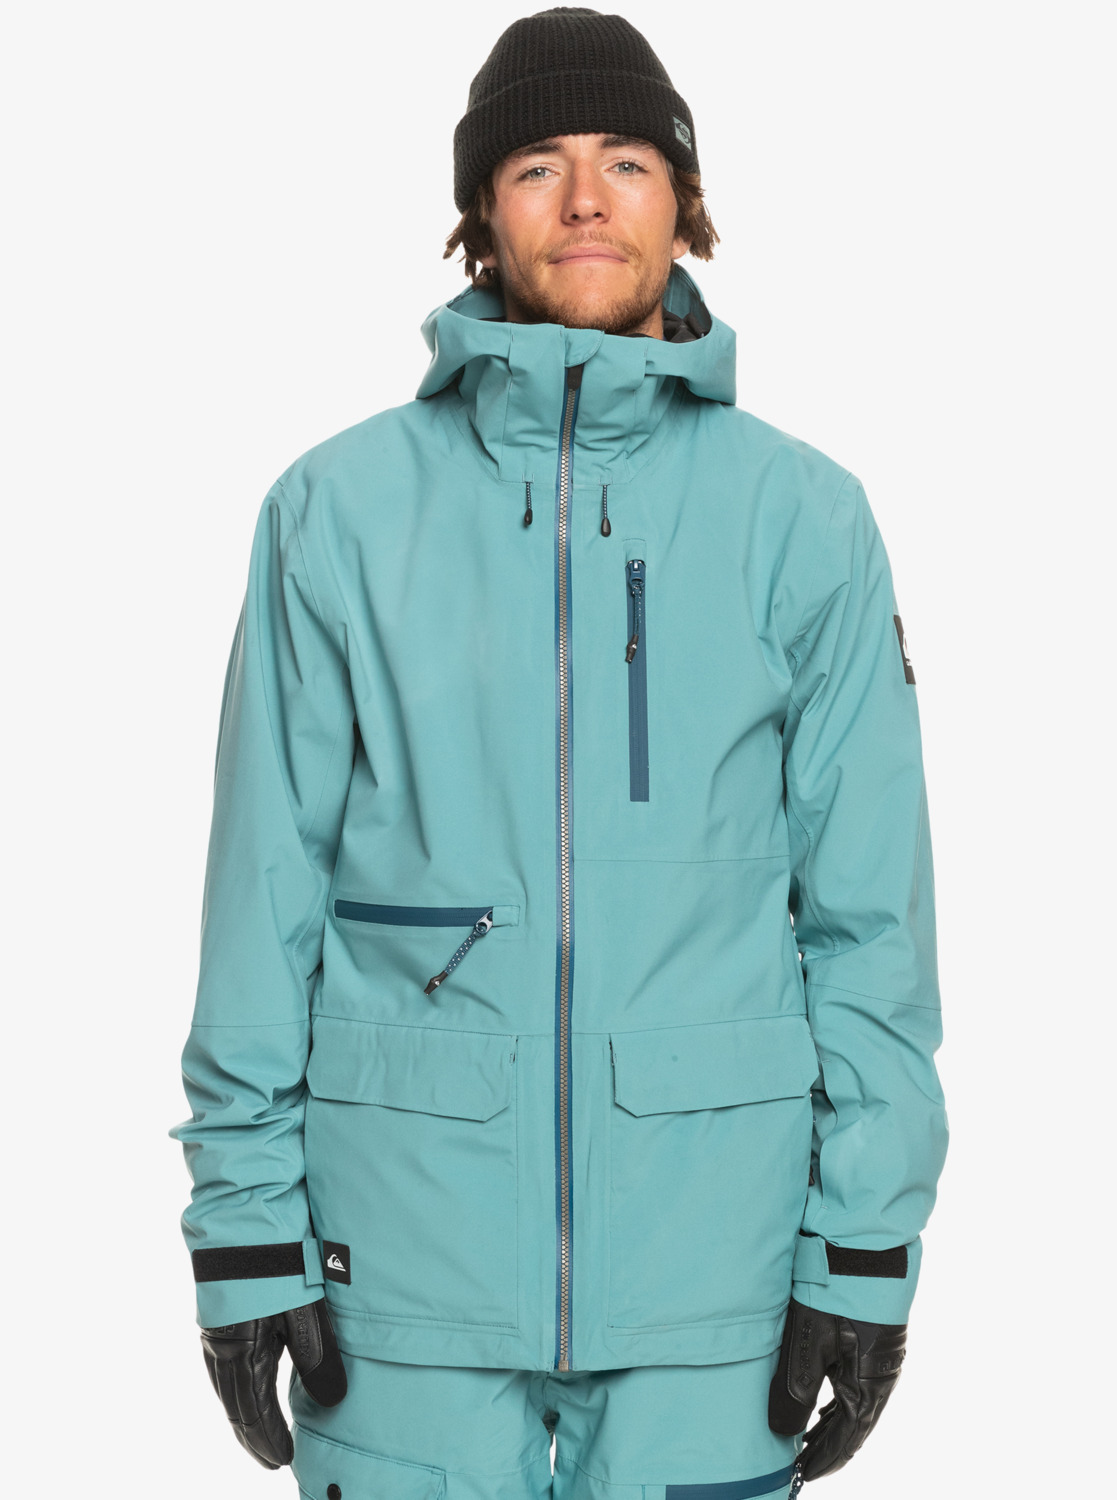 Quiksilver Carlson Stretch Quest jacket brittany blue